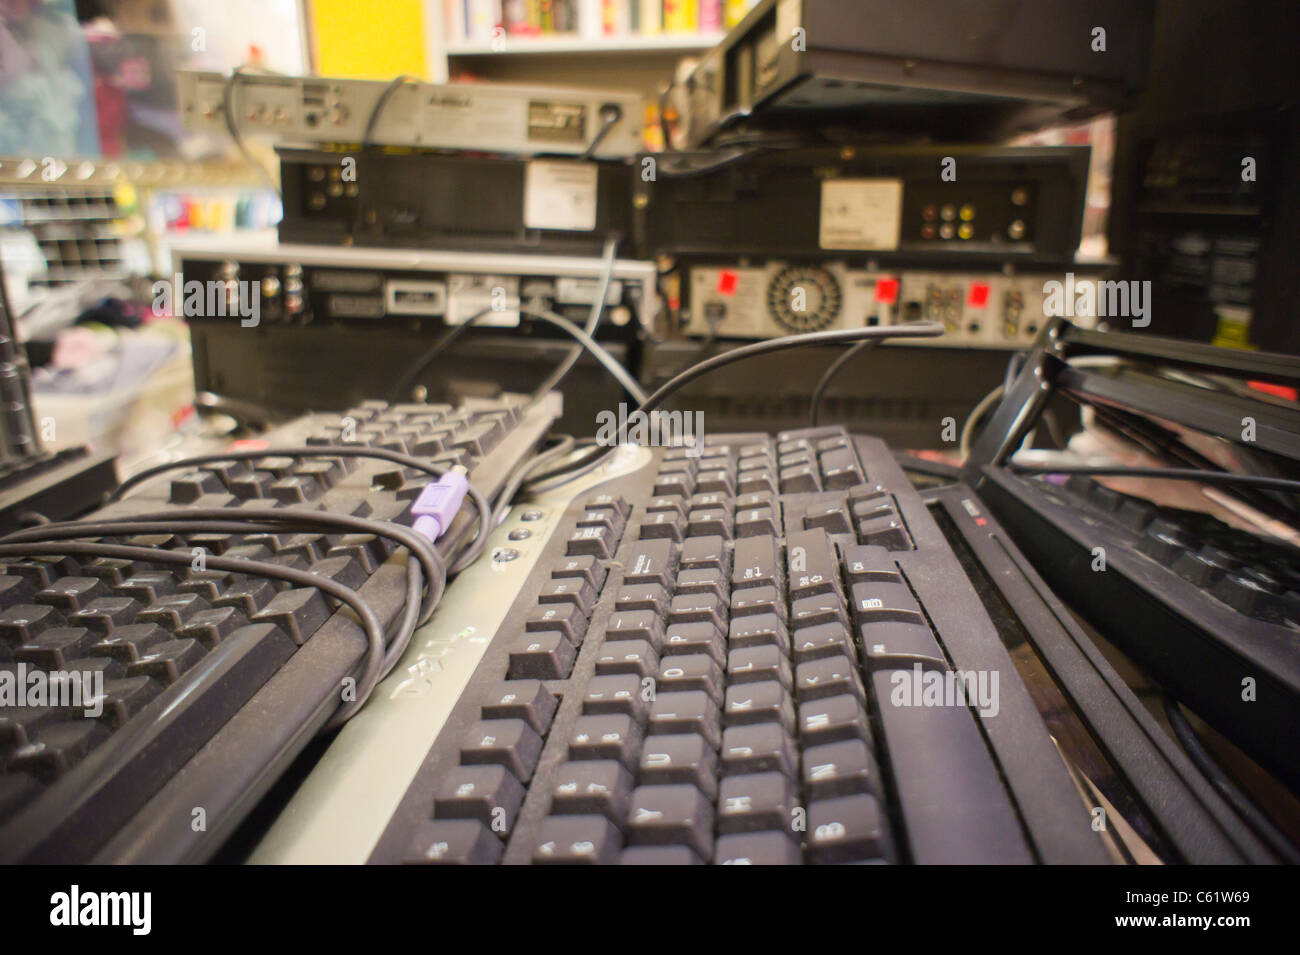 VCR's, keyboards and other older electronic products in a thrift store in New York Stock Photo